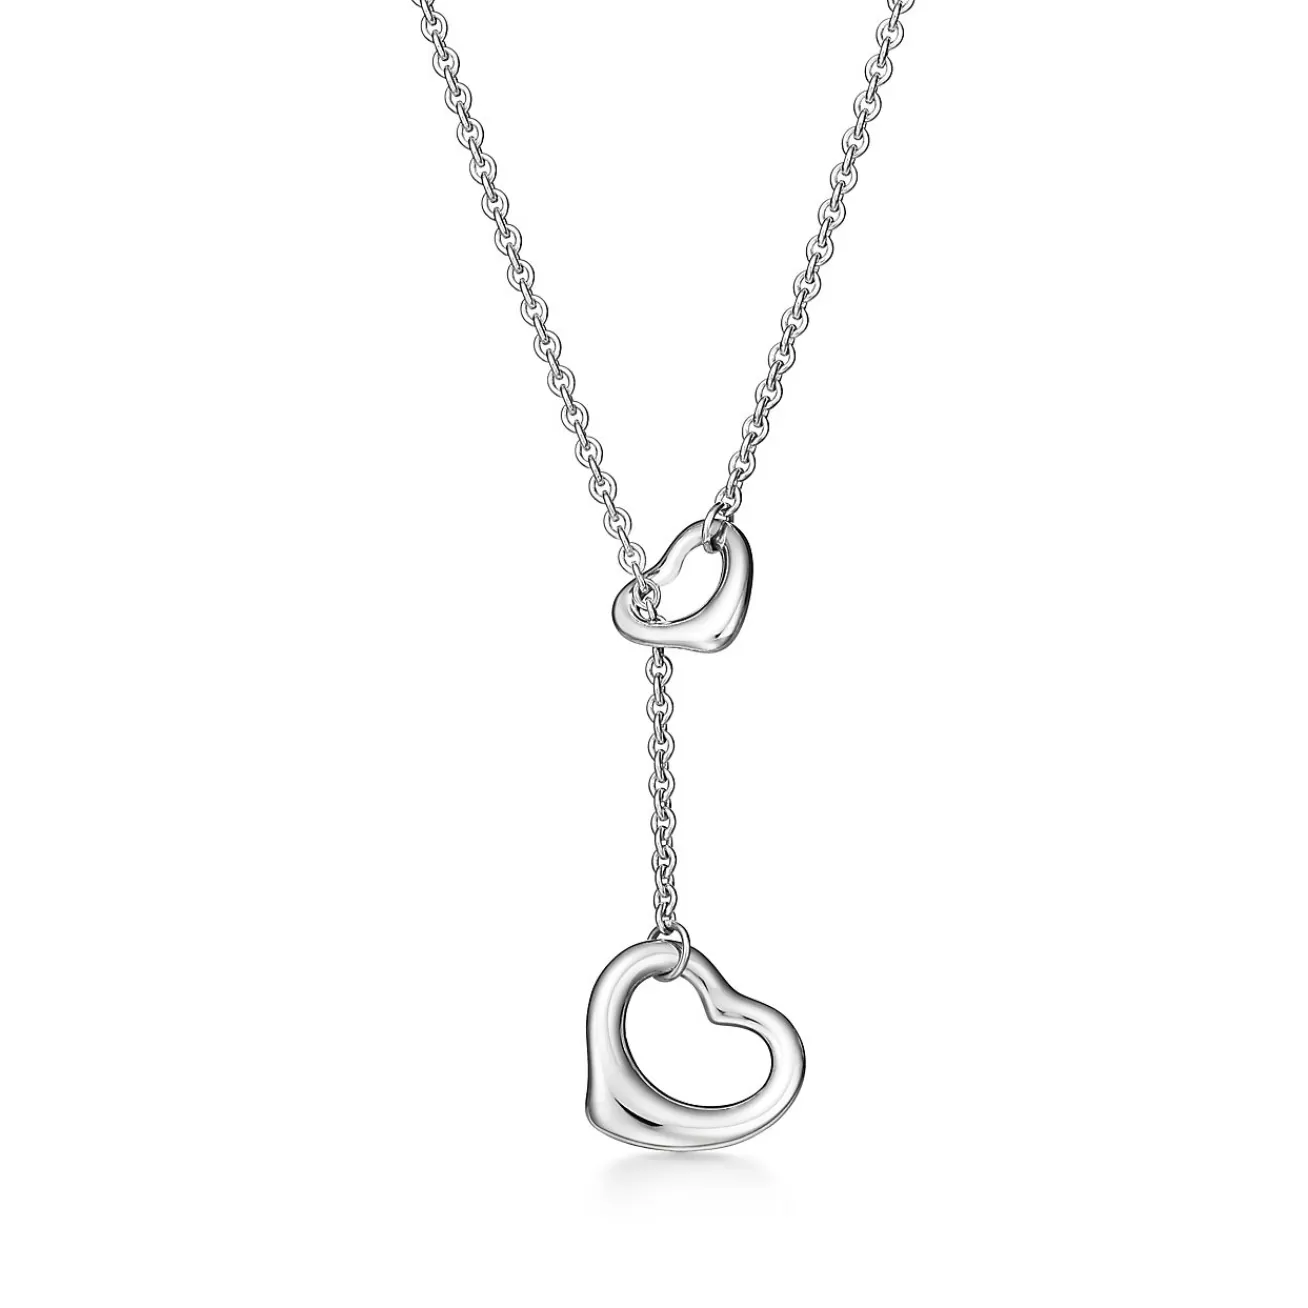 Tiffany & Co. Elsa Peretti® Open Heart Lariat Necklace in Silver, 16 mm | ^ Necklaces & Pendants | Gifts for Her